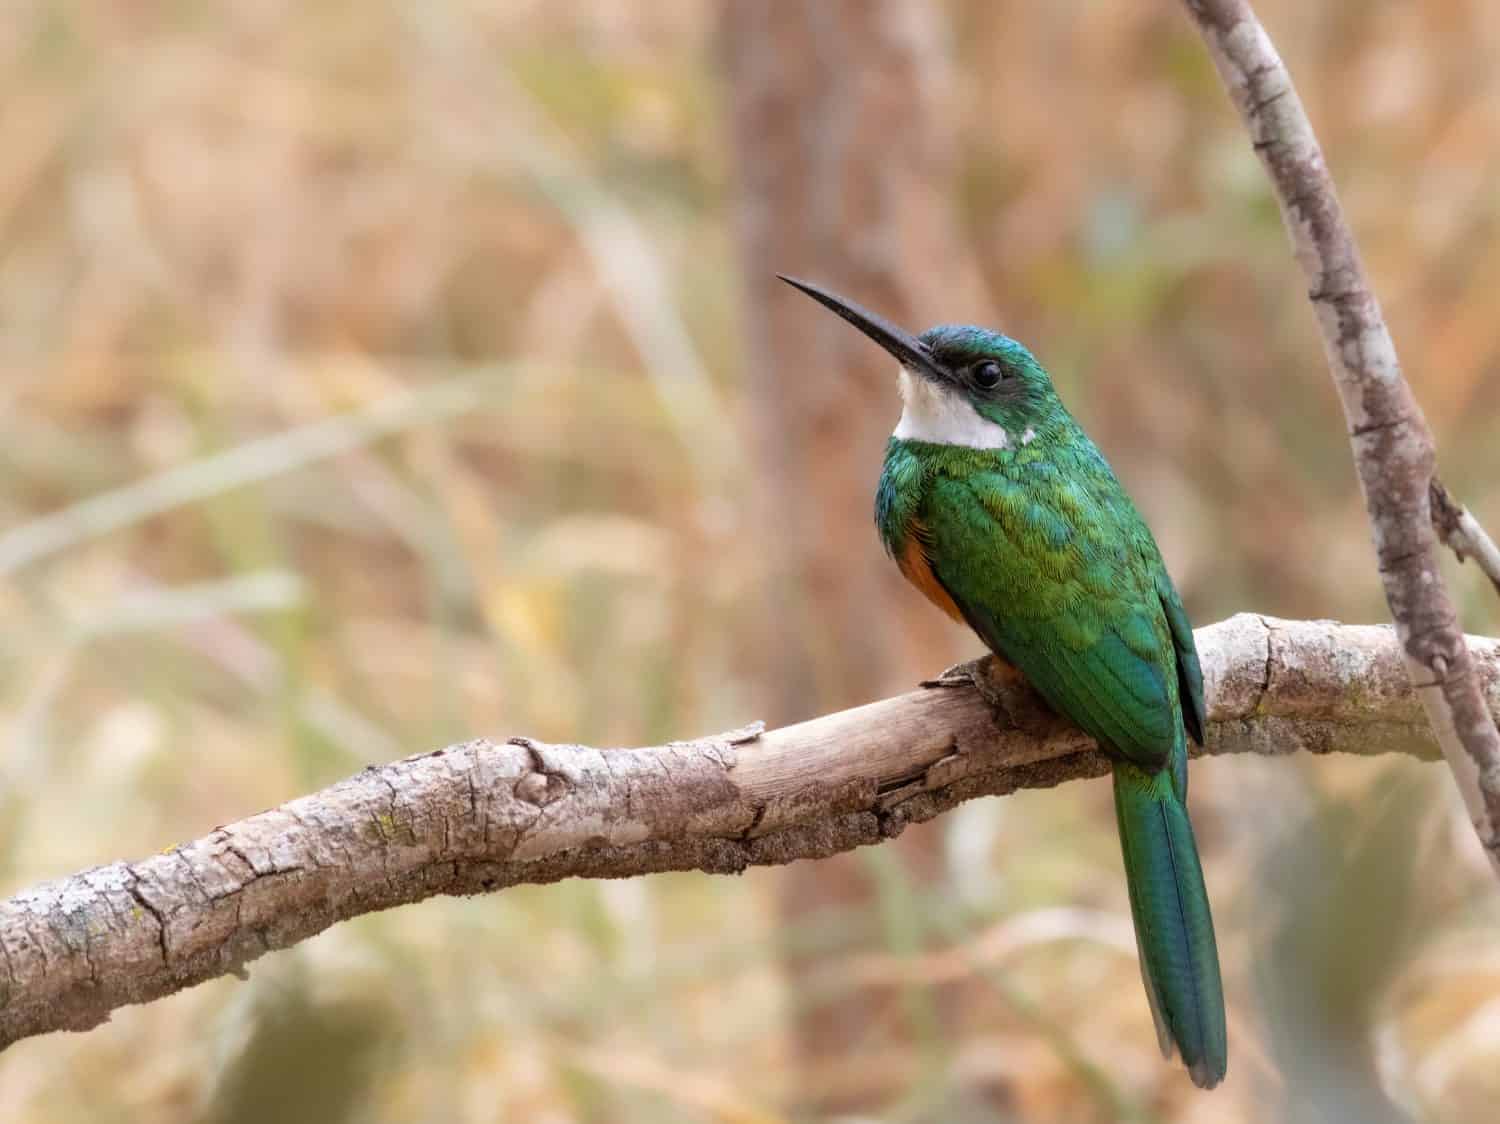 Rufous-Tailed Jacamar on central Brazil cerrado. I think this species is photogenic.